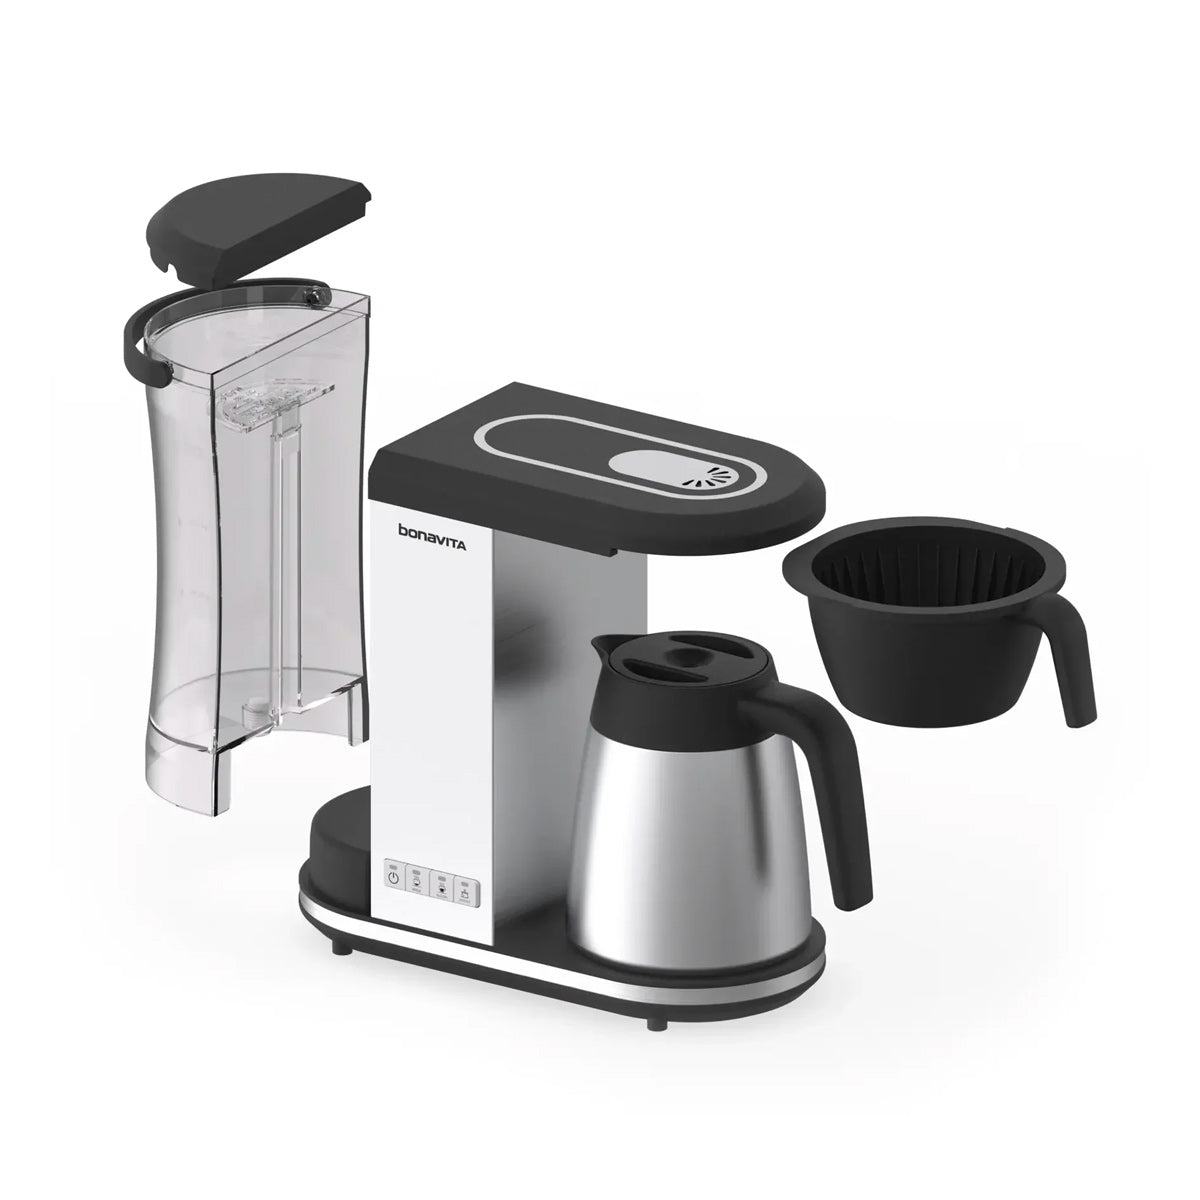 Bonavita 8-Cup Glass Carafe Coffee Brewer – The Concentrated Cup